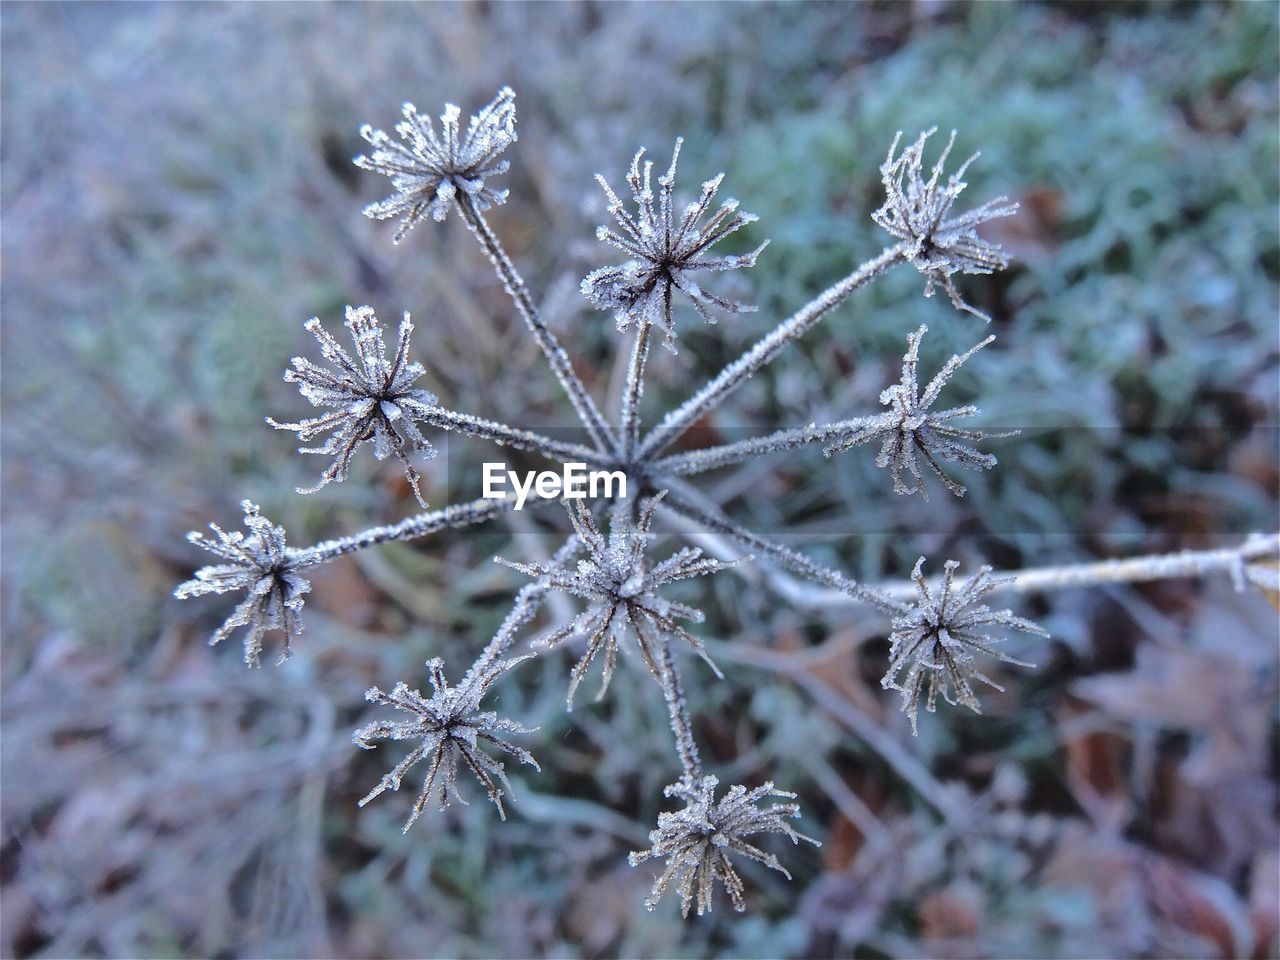 Cow parsley covered in winter hoar frost